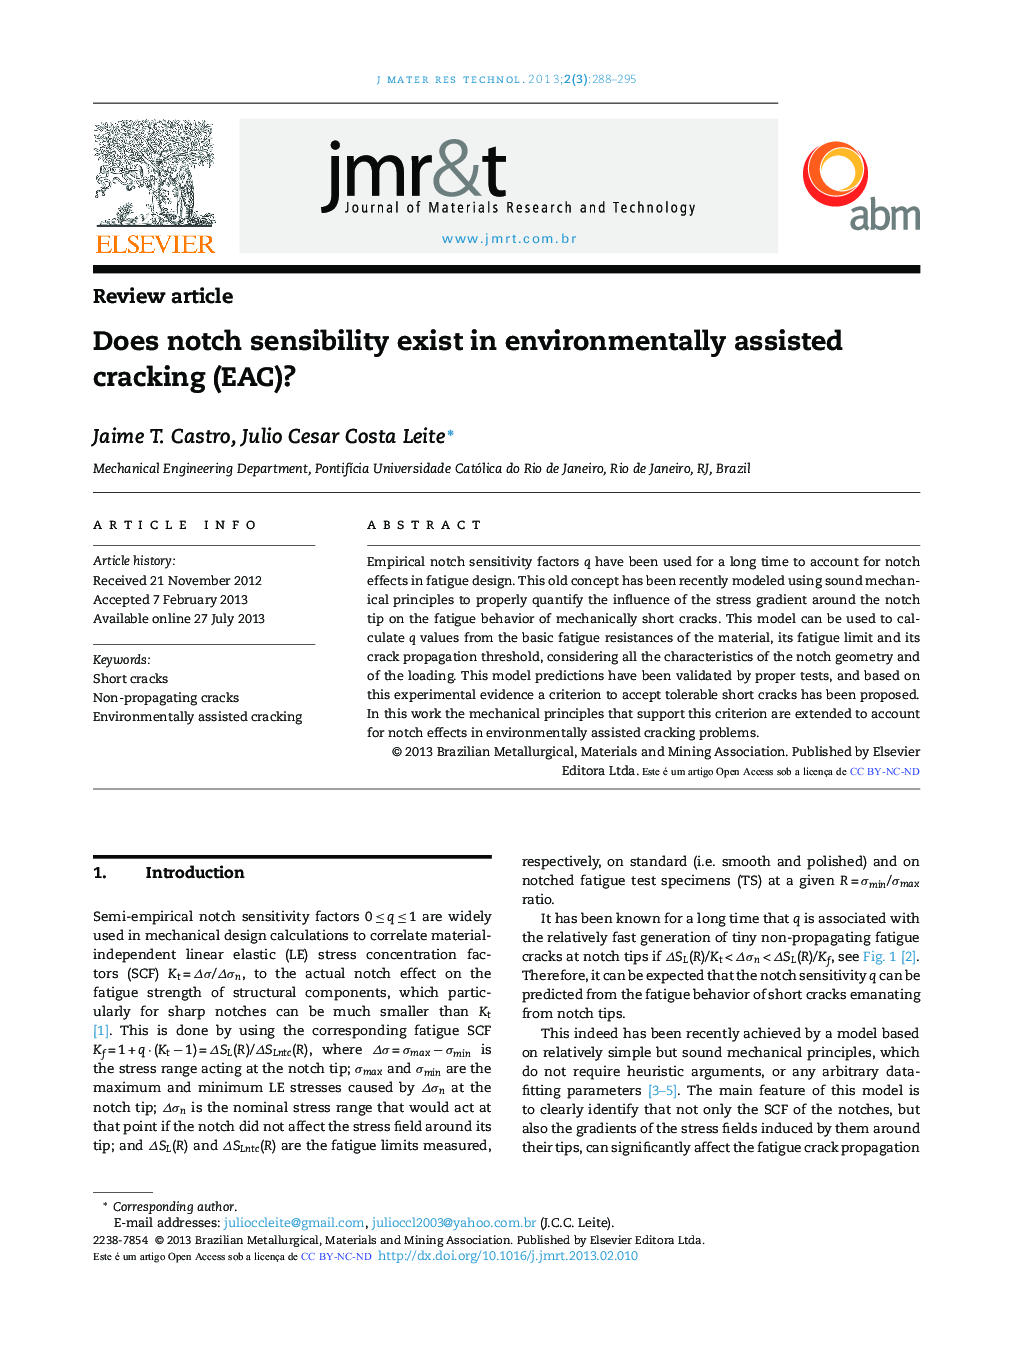 Does notch sensibility exist in environmentally assisted cracking (EAC)?